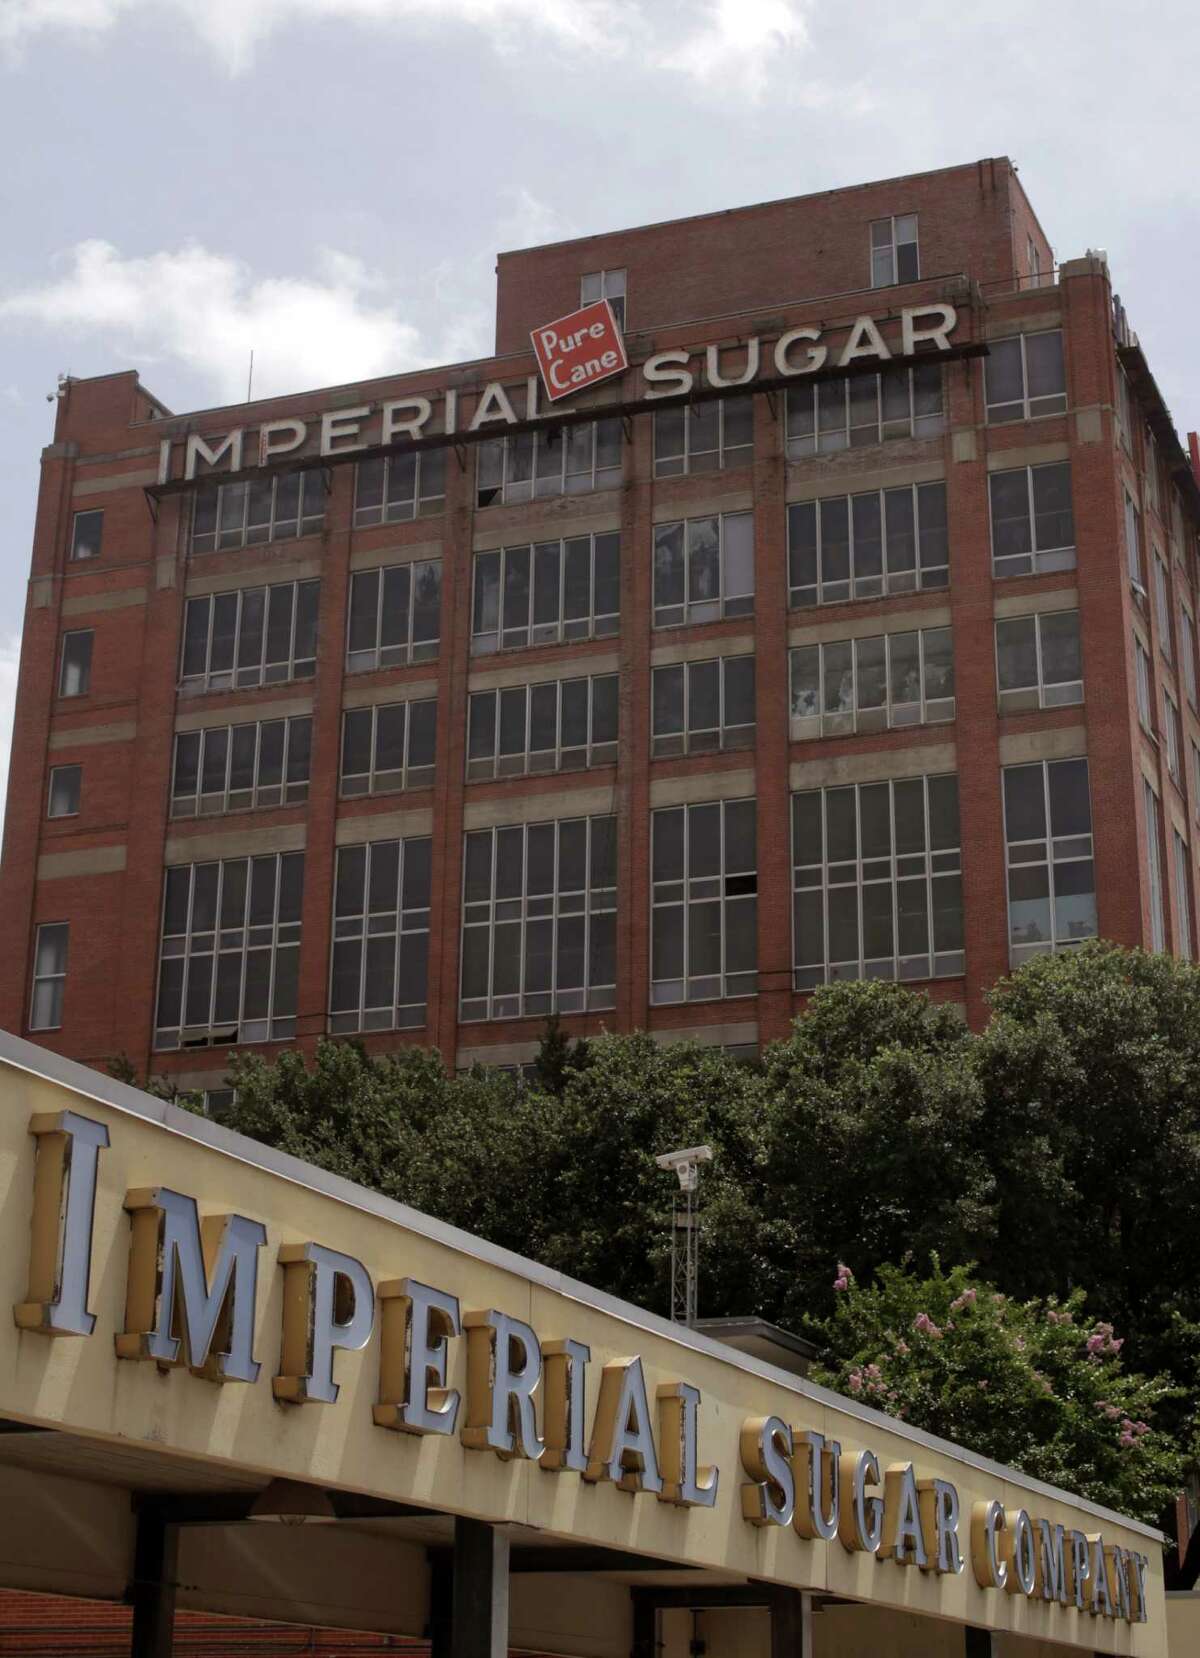 Developers James Murnane and Geoffrey Jones will develop the old Imperial Sugar Char House into a 120-room aloft hotel. ( J. Patric Schneider / For the Chronicle )